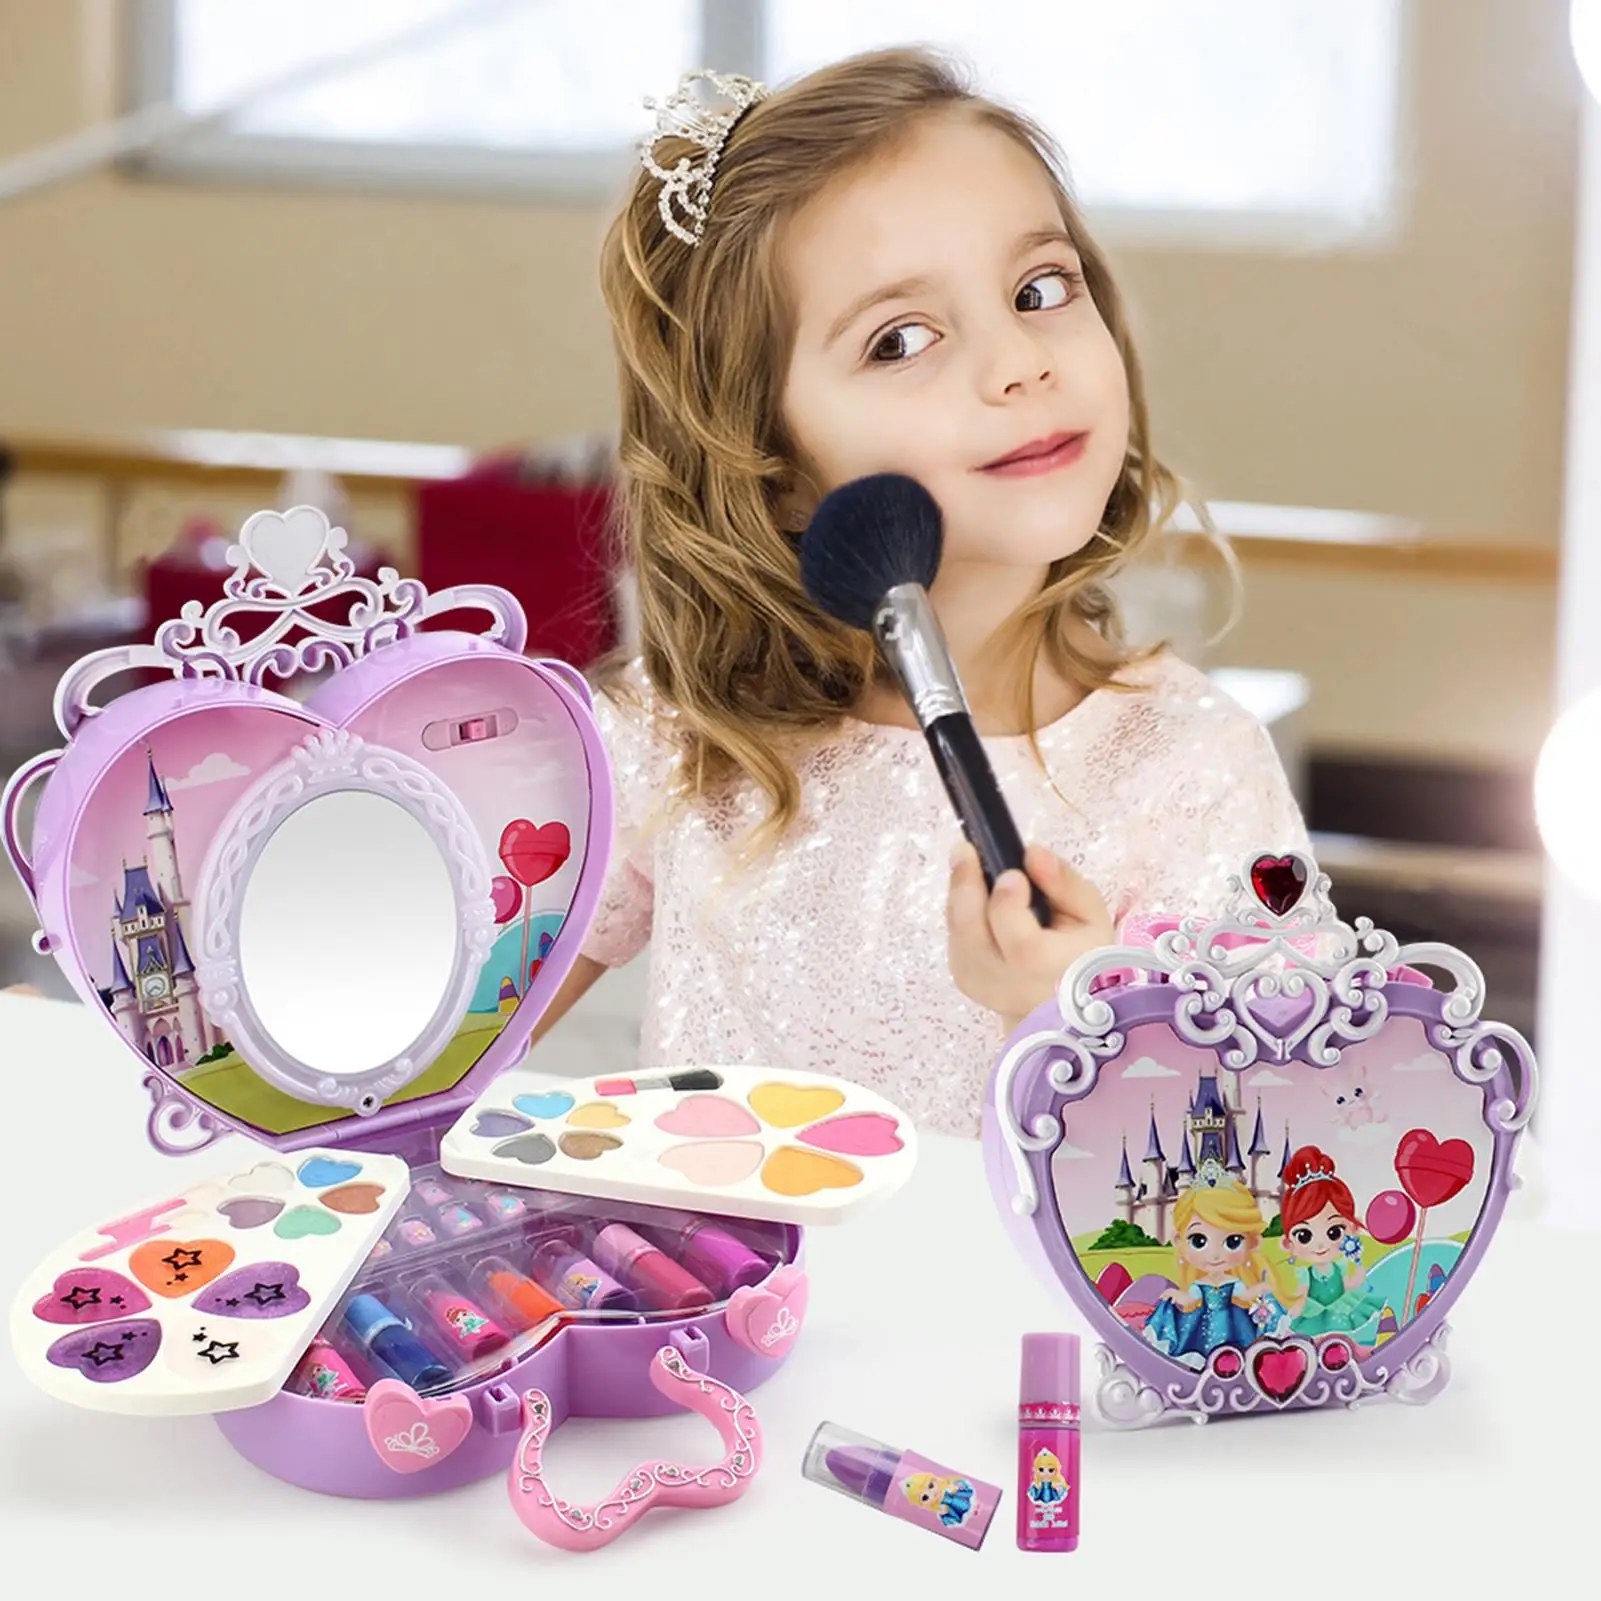 Children Girls Washable Portable Cosmetic Case Makeup Tools Play House Fashion Toys Set For Children Princess Dress Up Princess